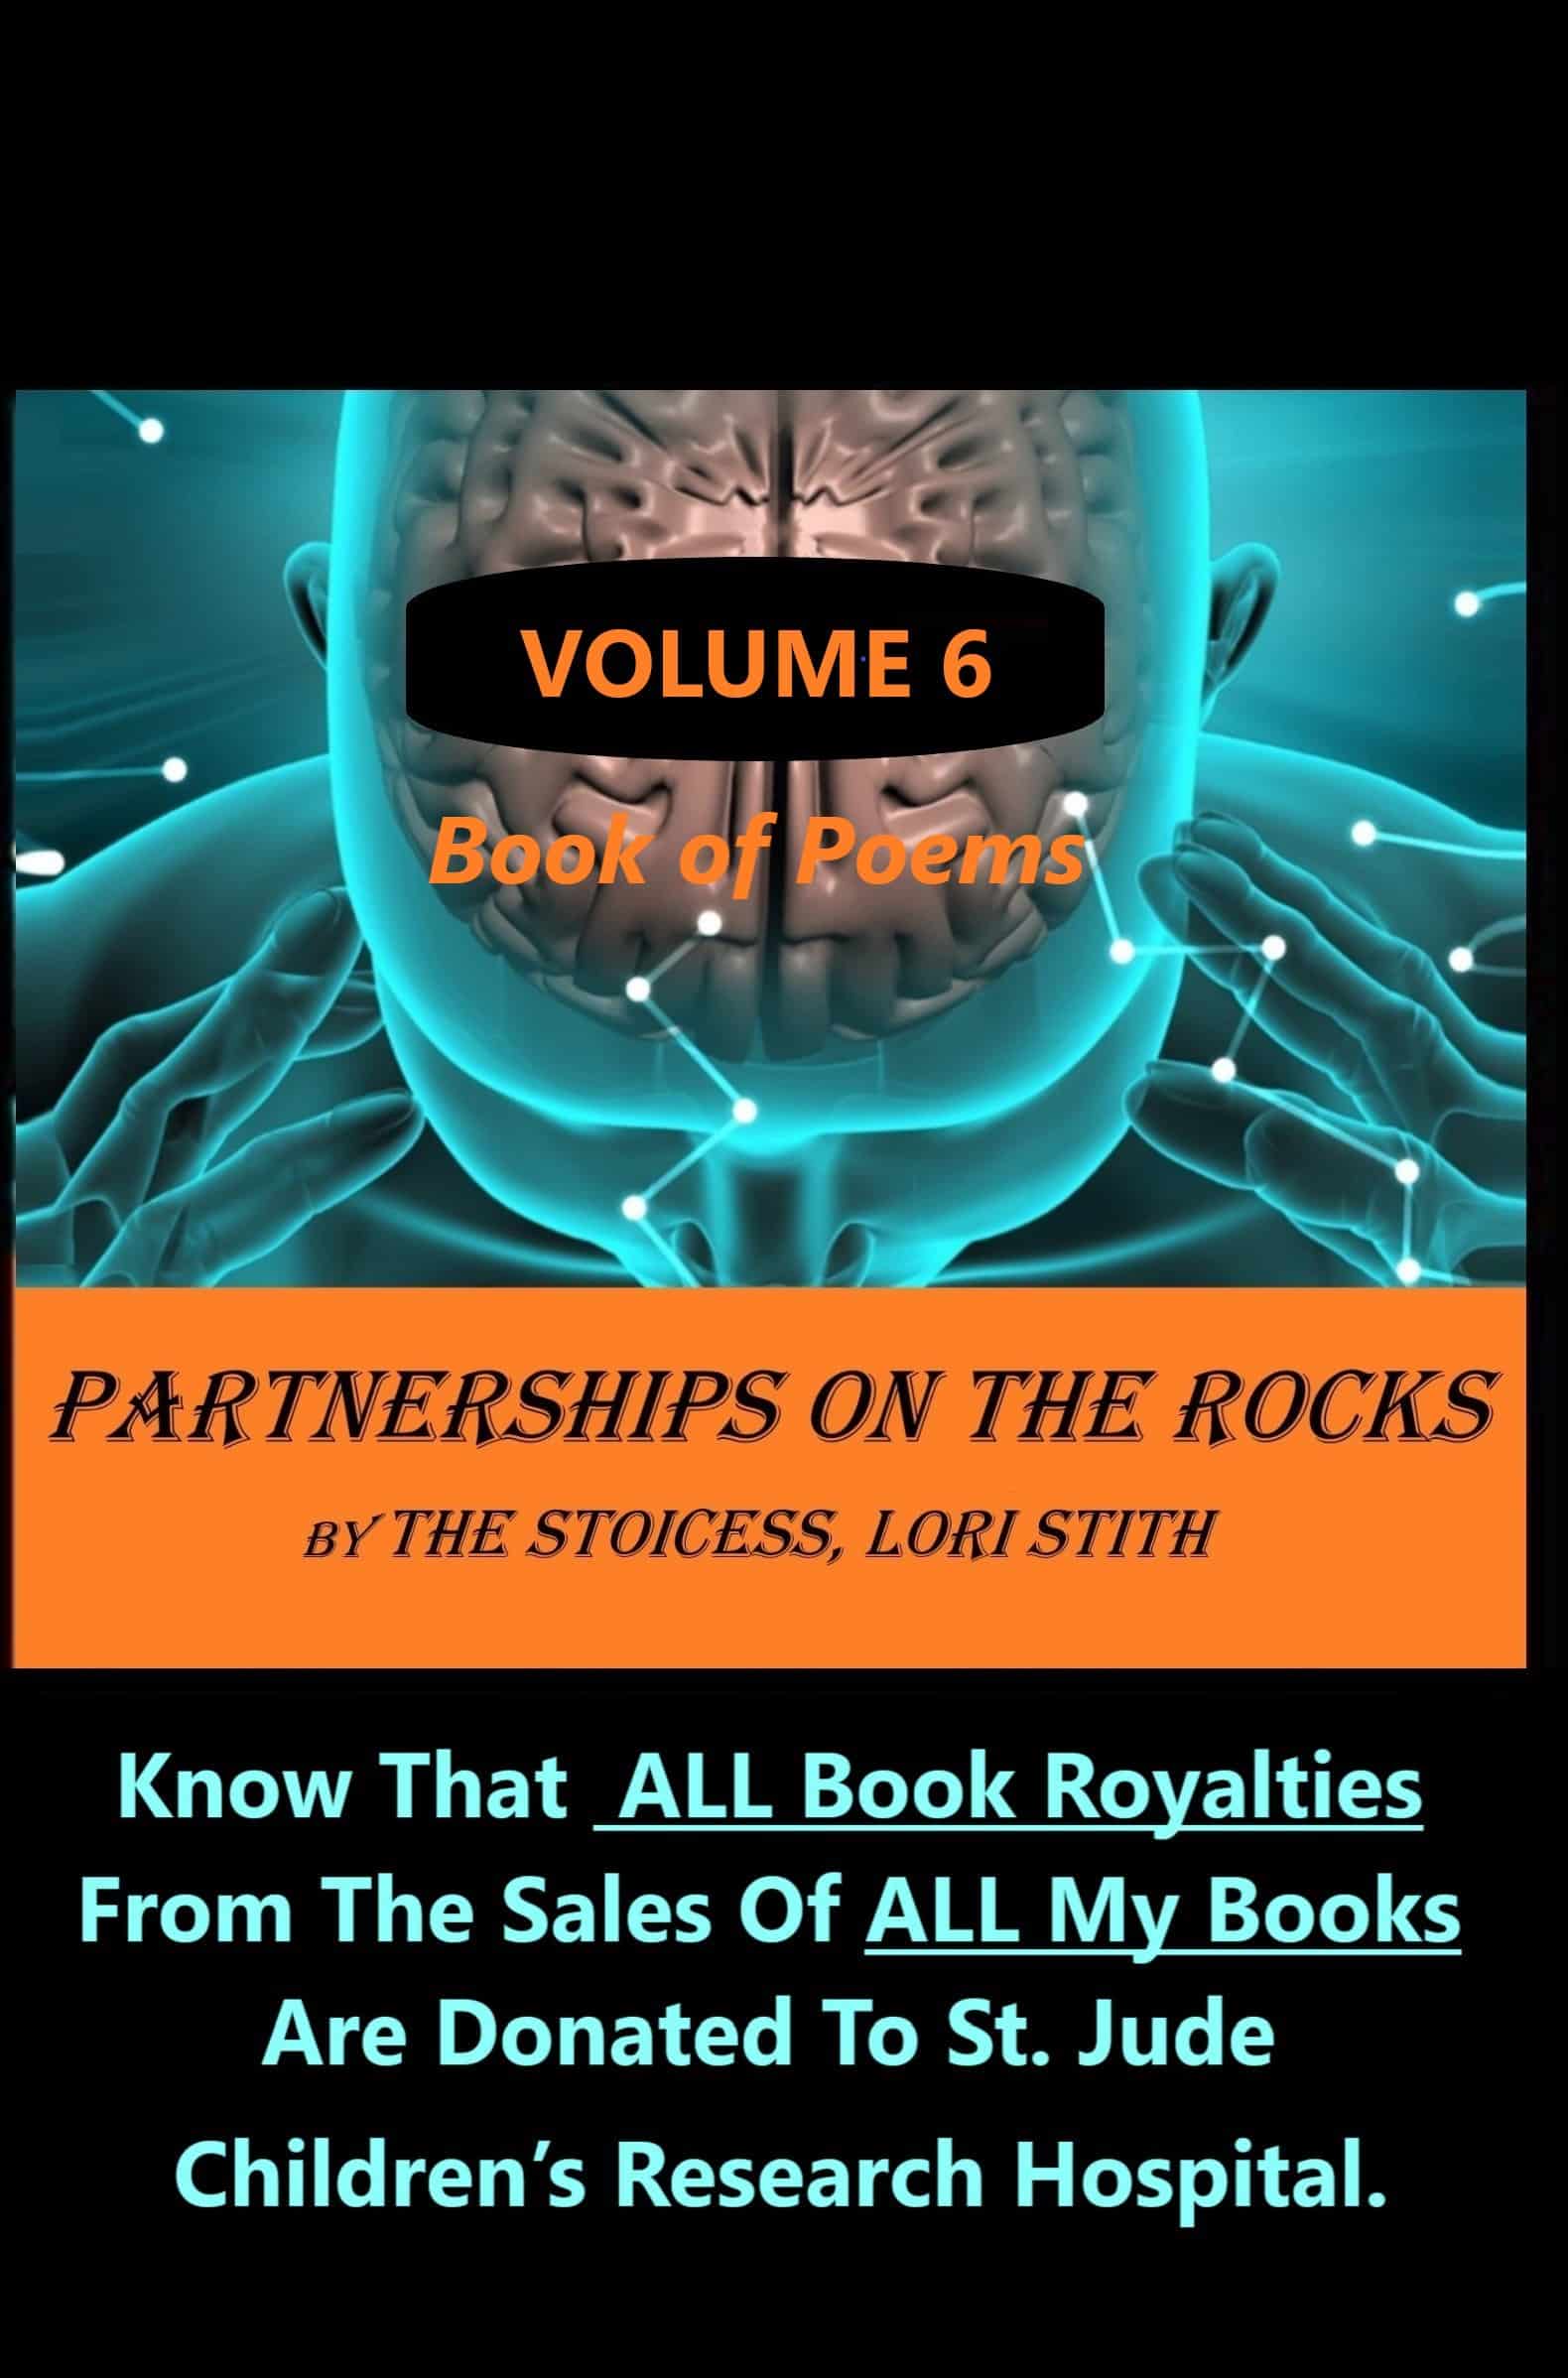 “Partnerships on the Rocks: Vol 6.  Buy now & let's help our children, together!